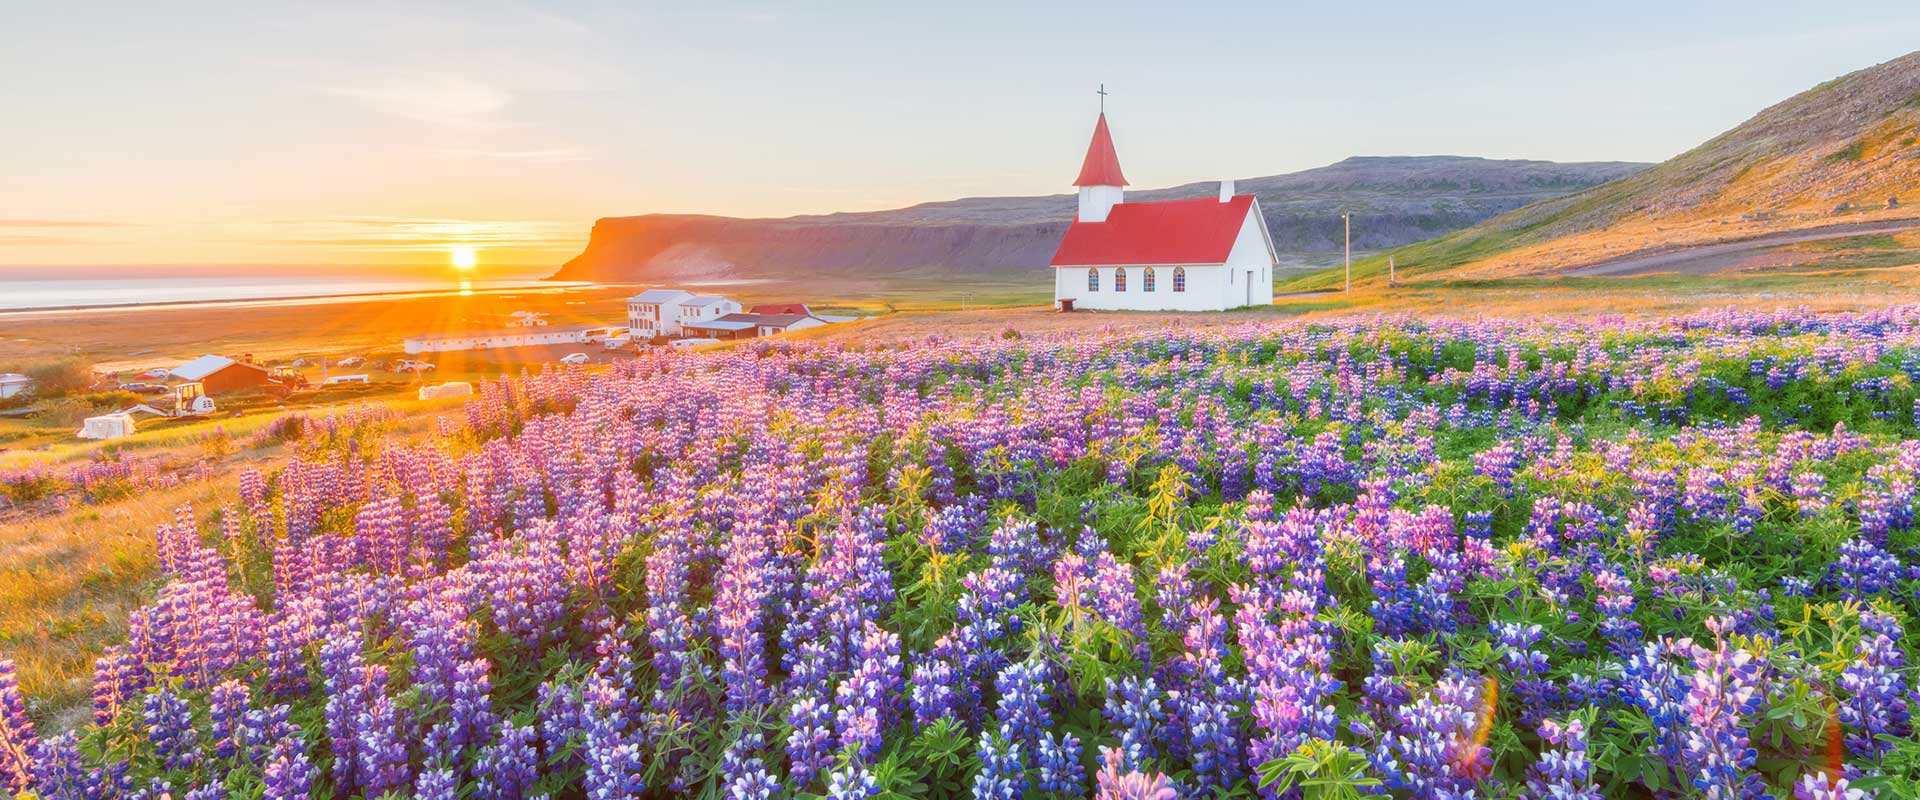 GettyImages 816855718 Iceland Header